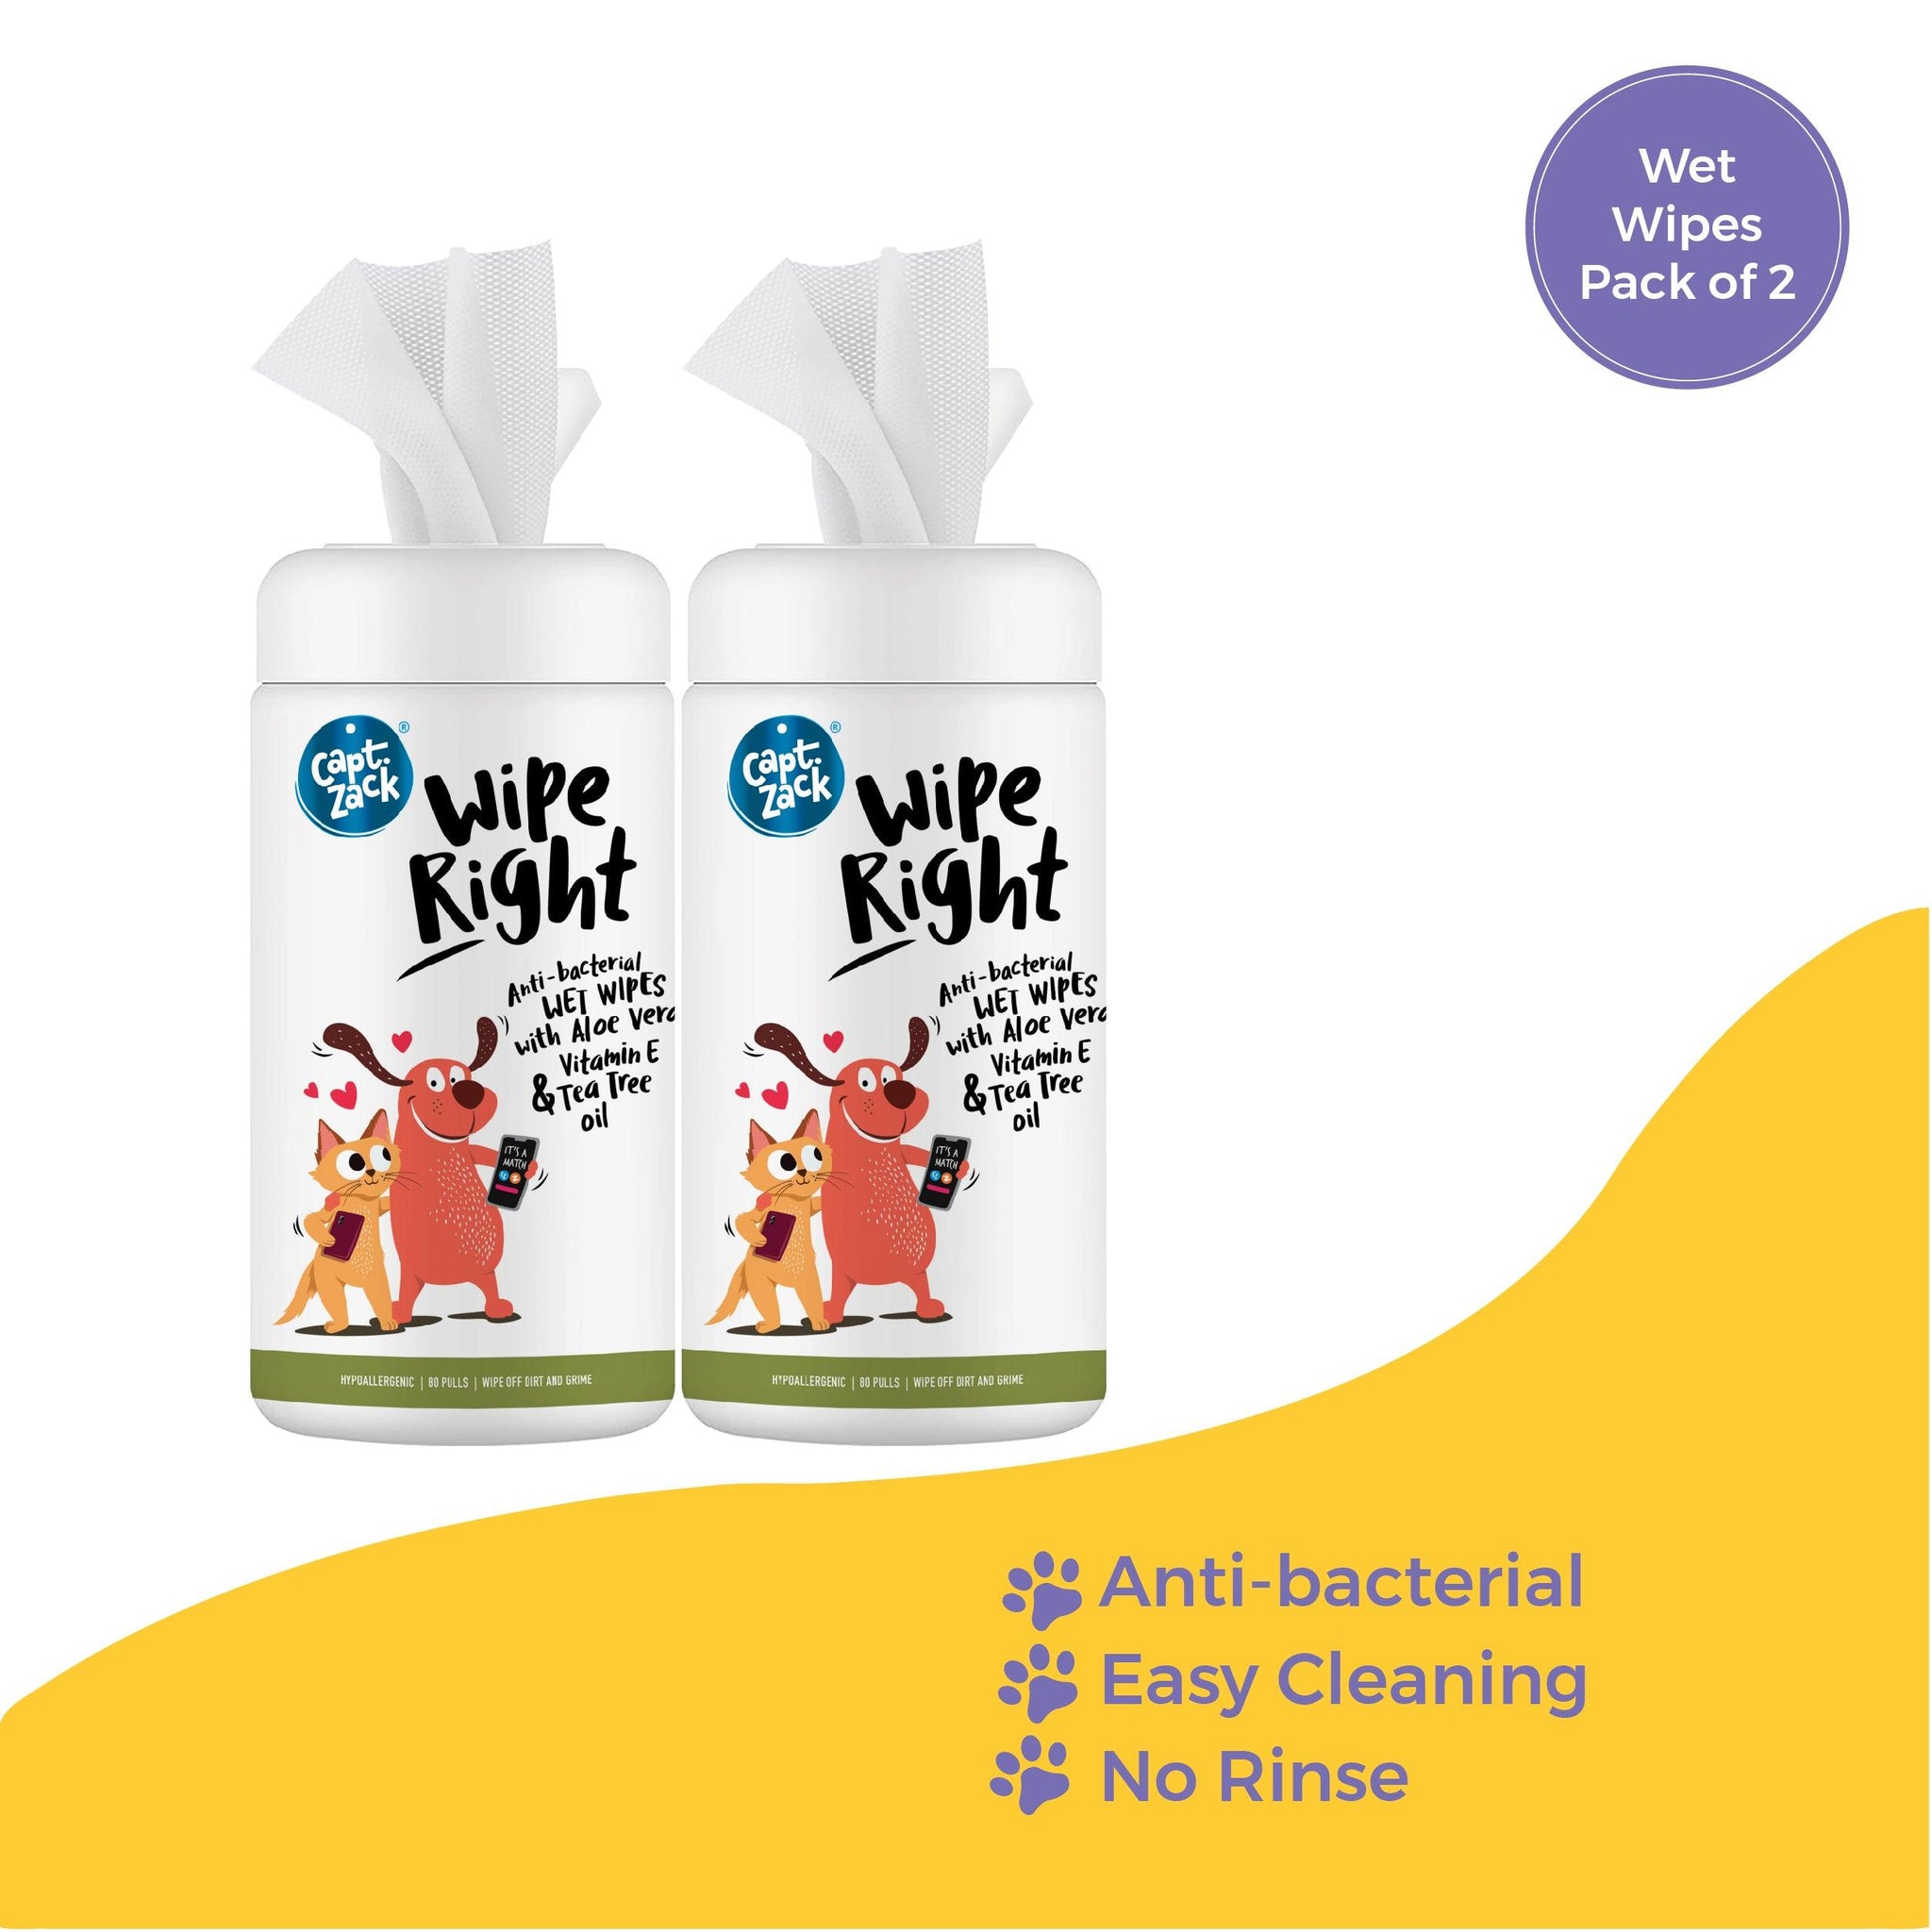 Wipe Right Anti-Bacterial Wet Wipes Pack of 2 - Captain Zack